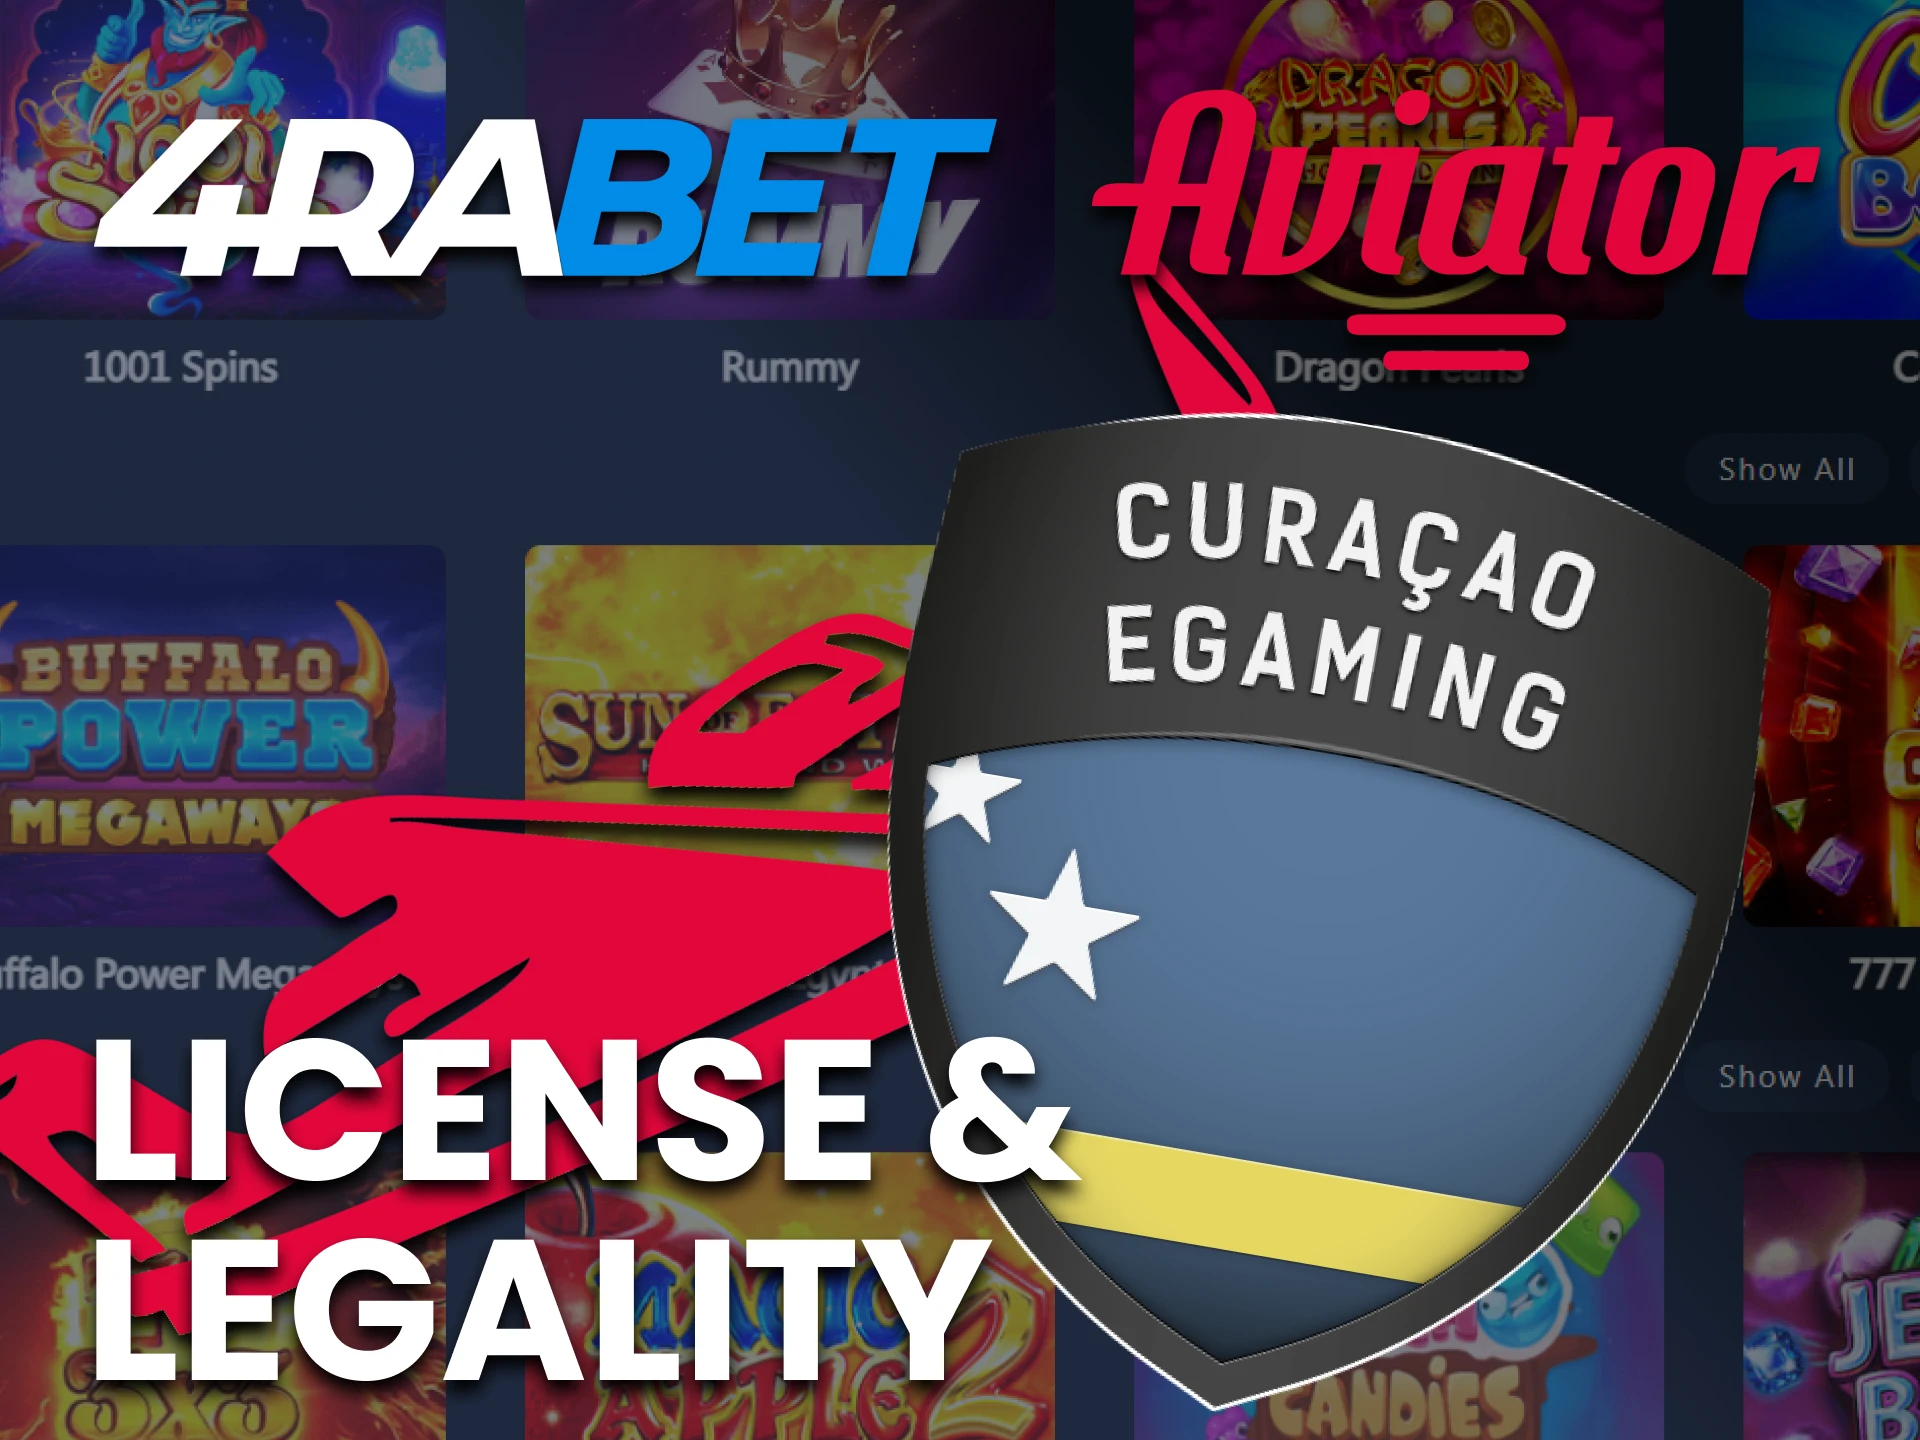 4rabet provides betting and gambling services under the Curacao license.